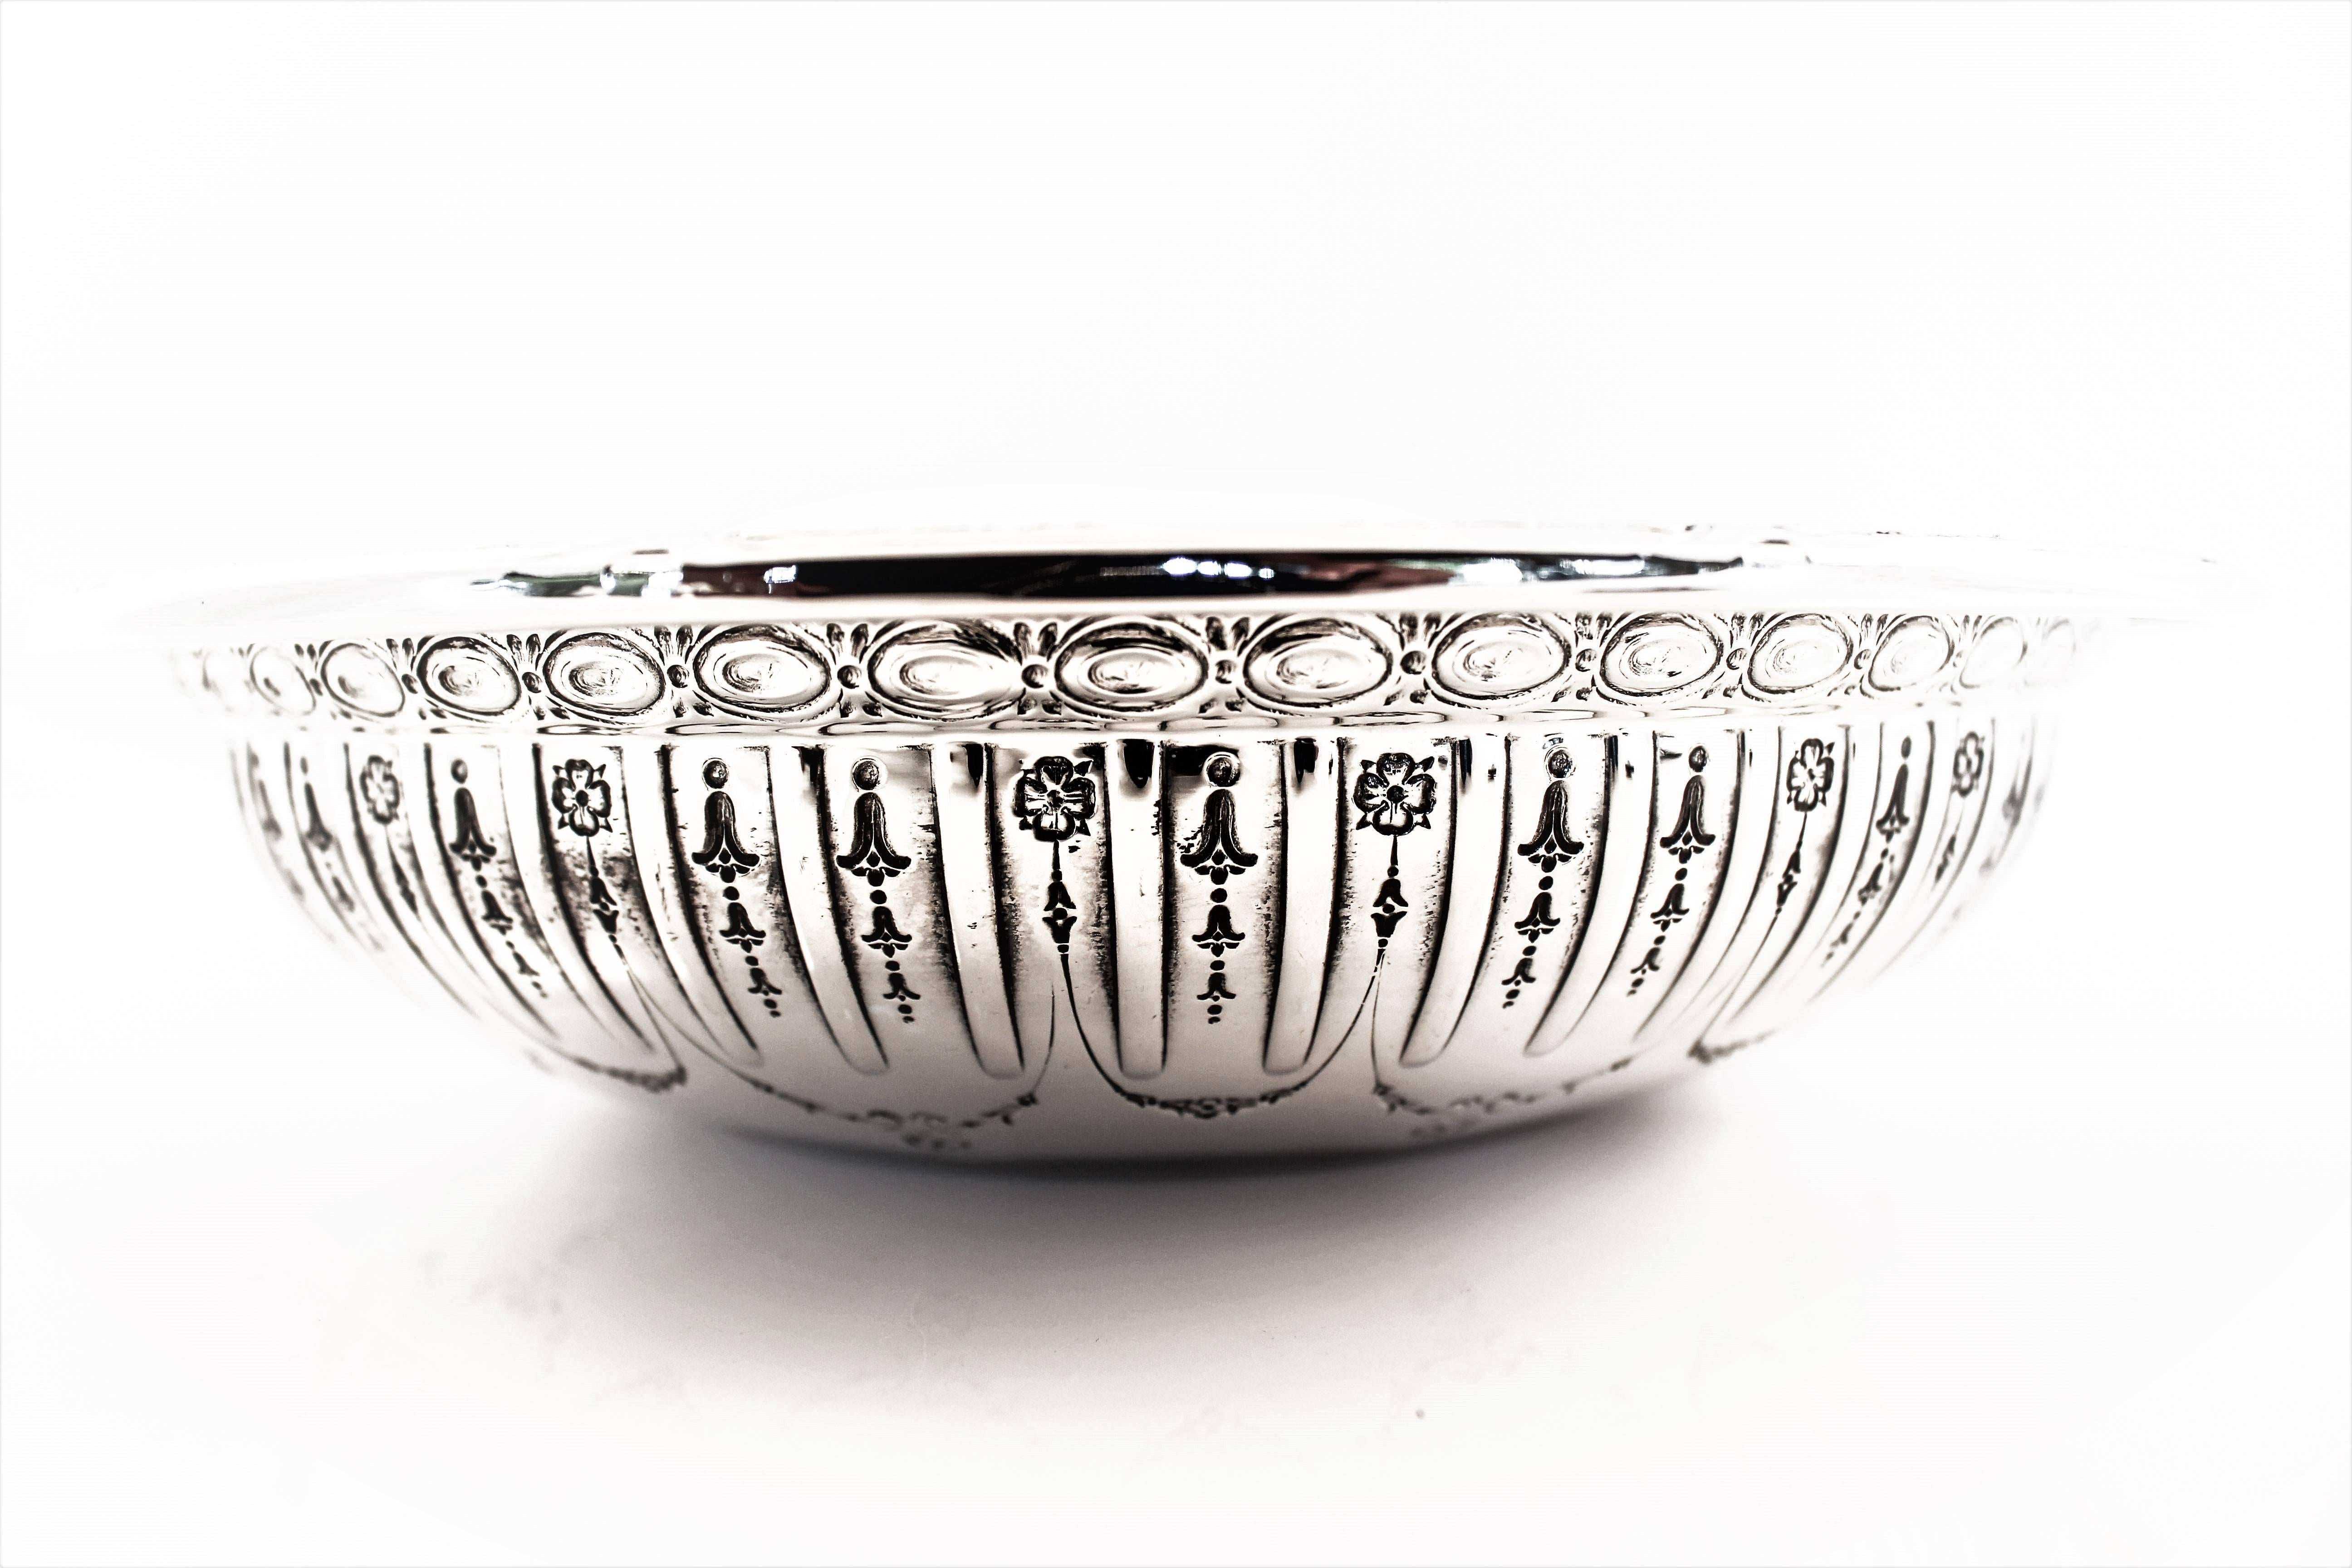 True to it’s name, this bowl is decadent and rich in design. Floral wreaths drape the interior and exterior of the bowl while an oval shaped motif encircles the very top. Makes a great wedding or anniversary gift and is the perfect size for everyday